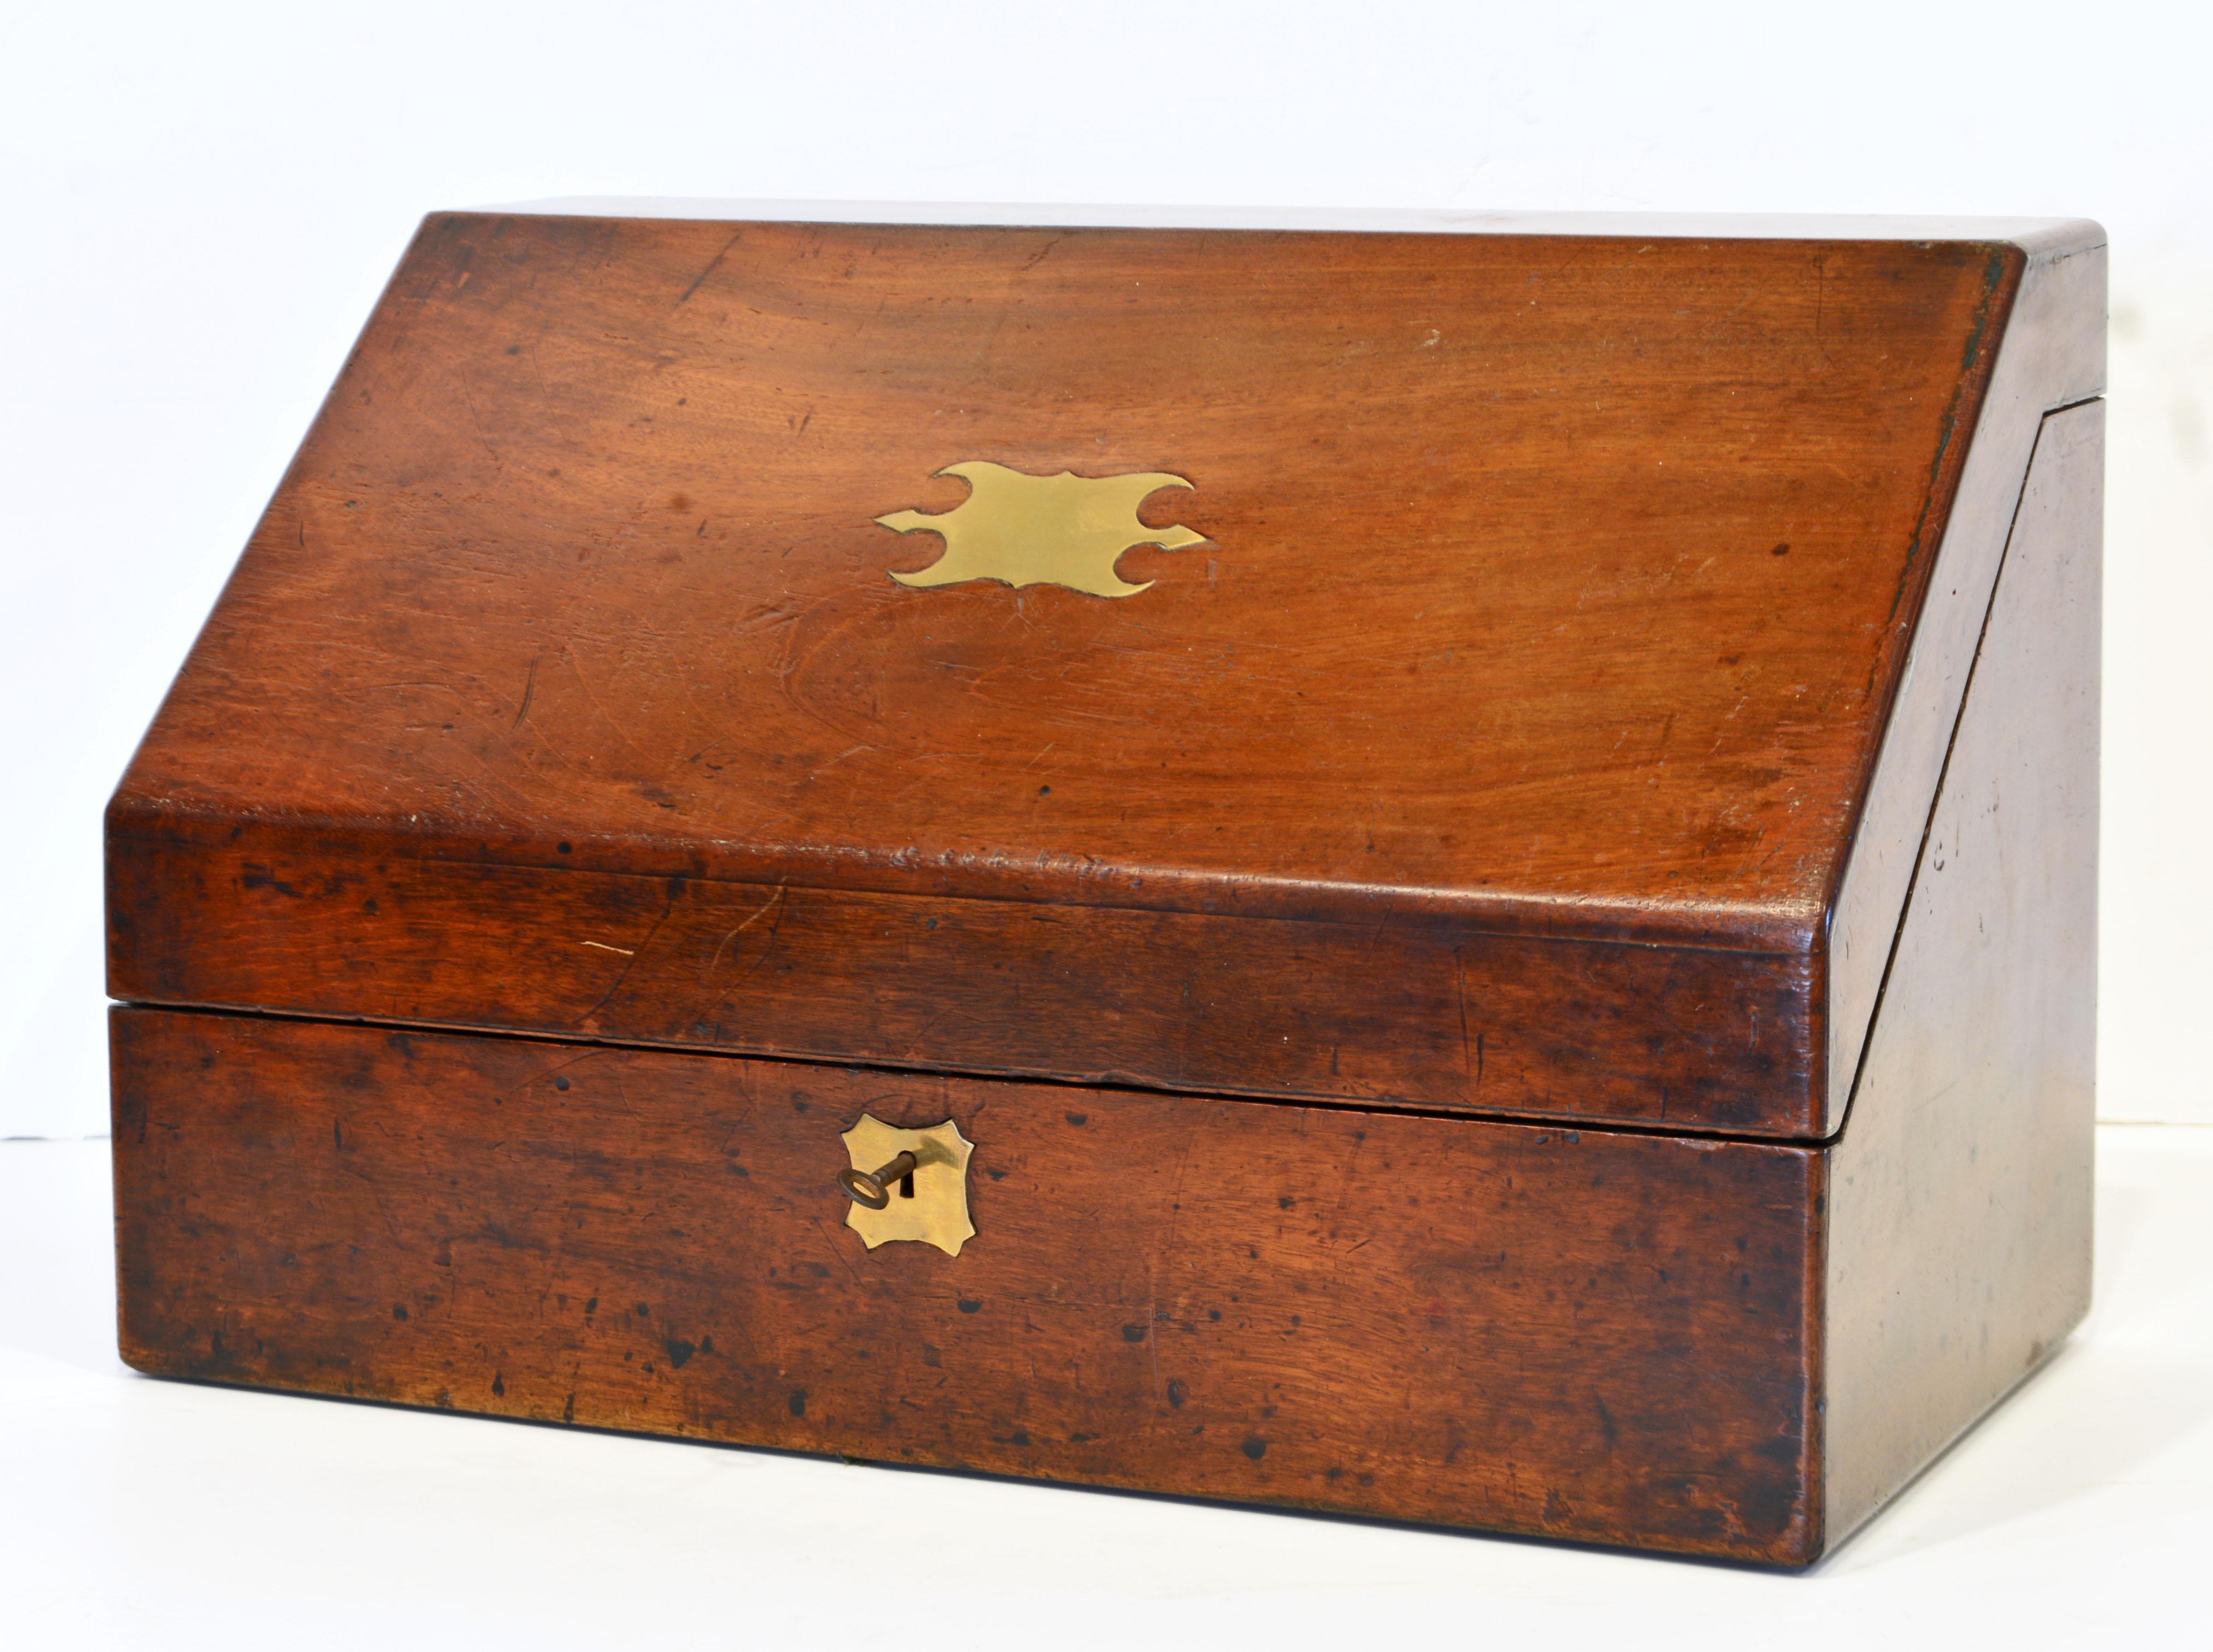 This fine campaign letter box dating to around 1860 features a brass inlaid slant top opening up to an interior fitted with compartments for various paper sizes, a compartment for the original inkwell and one for writing accessories. To the bottom